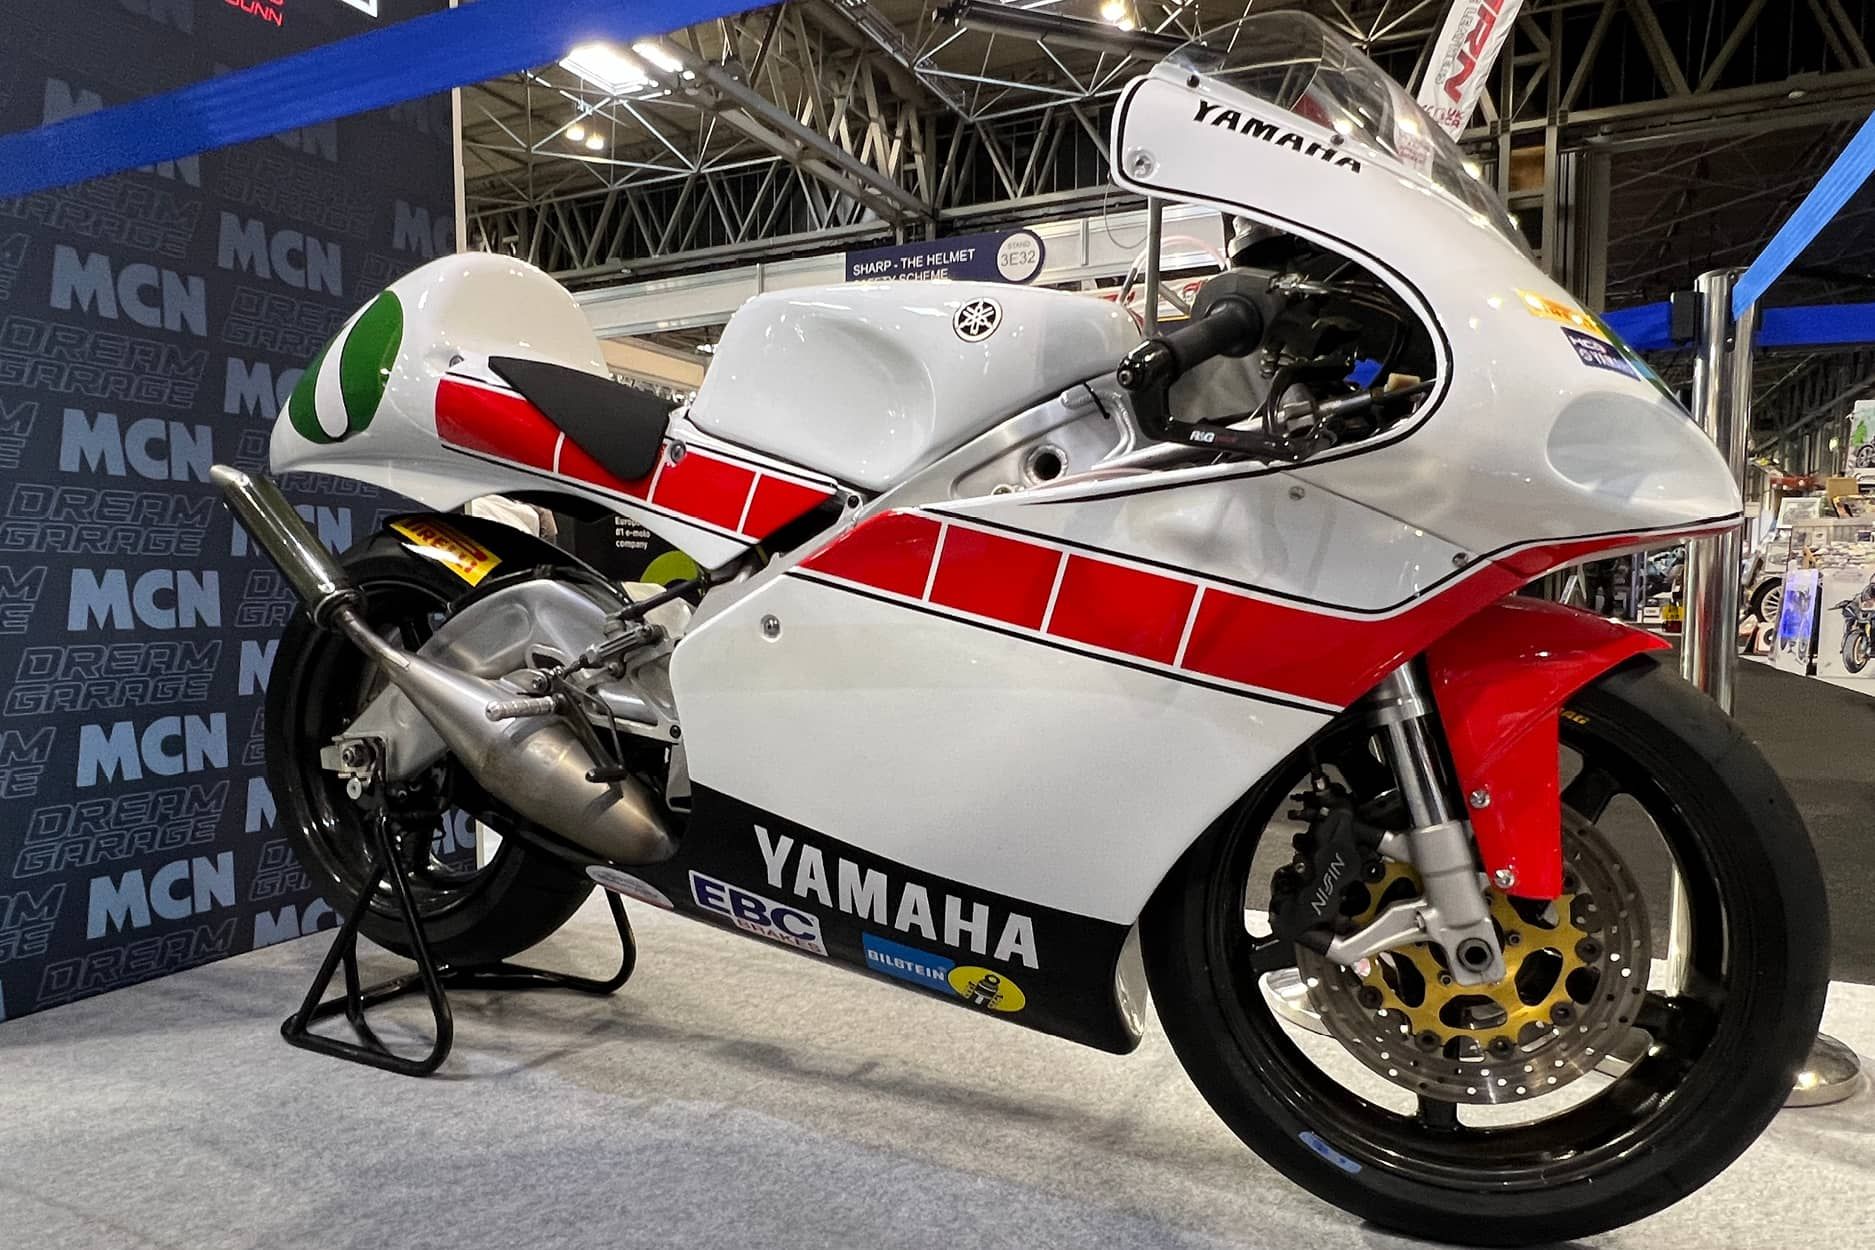 MCN Dream Garage - Yamaha TZ250 (2001) owned by Bruce Dunn